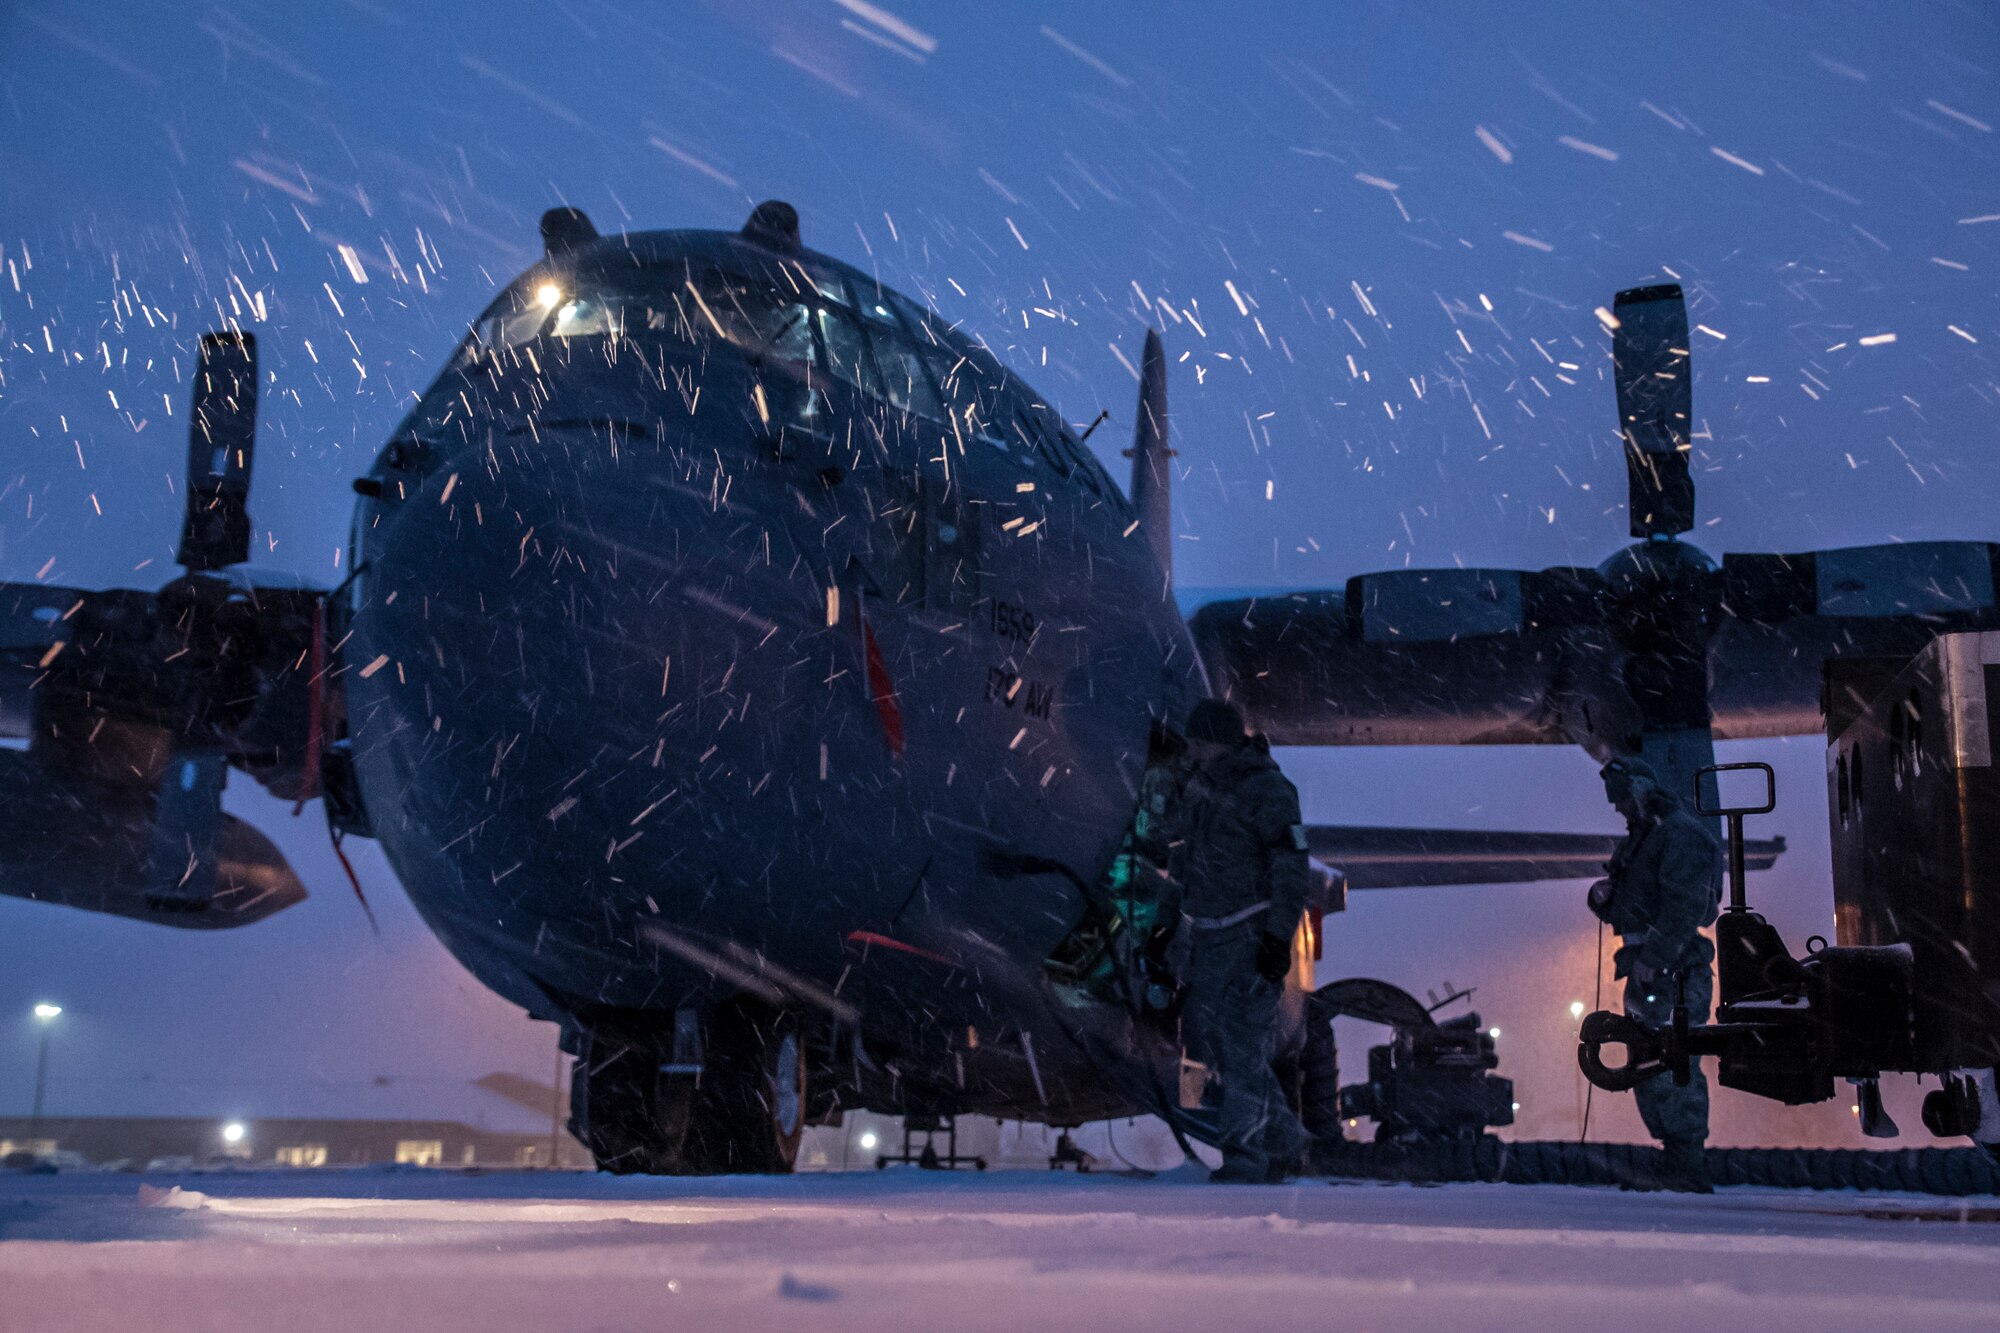 A photo of a C-130 in the early morning during a snowstorm.